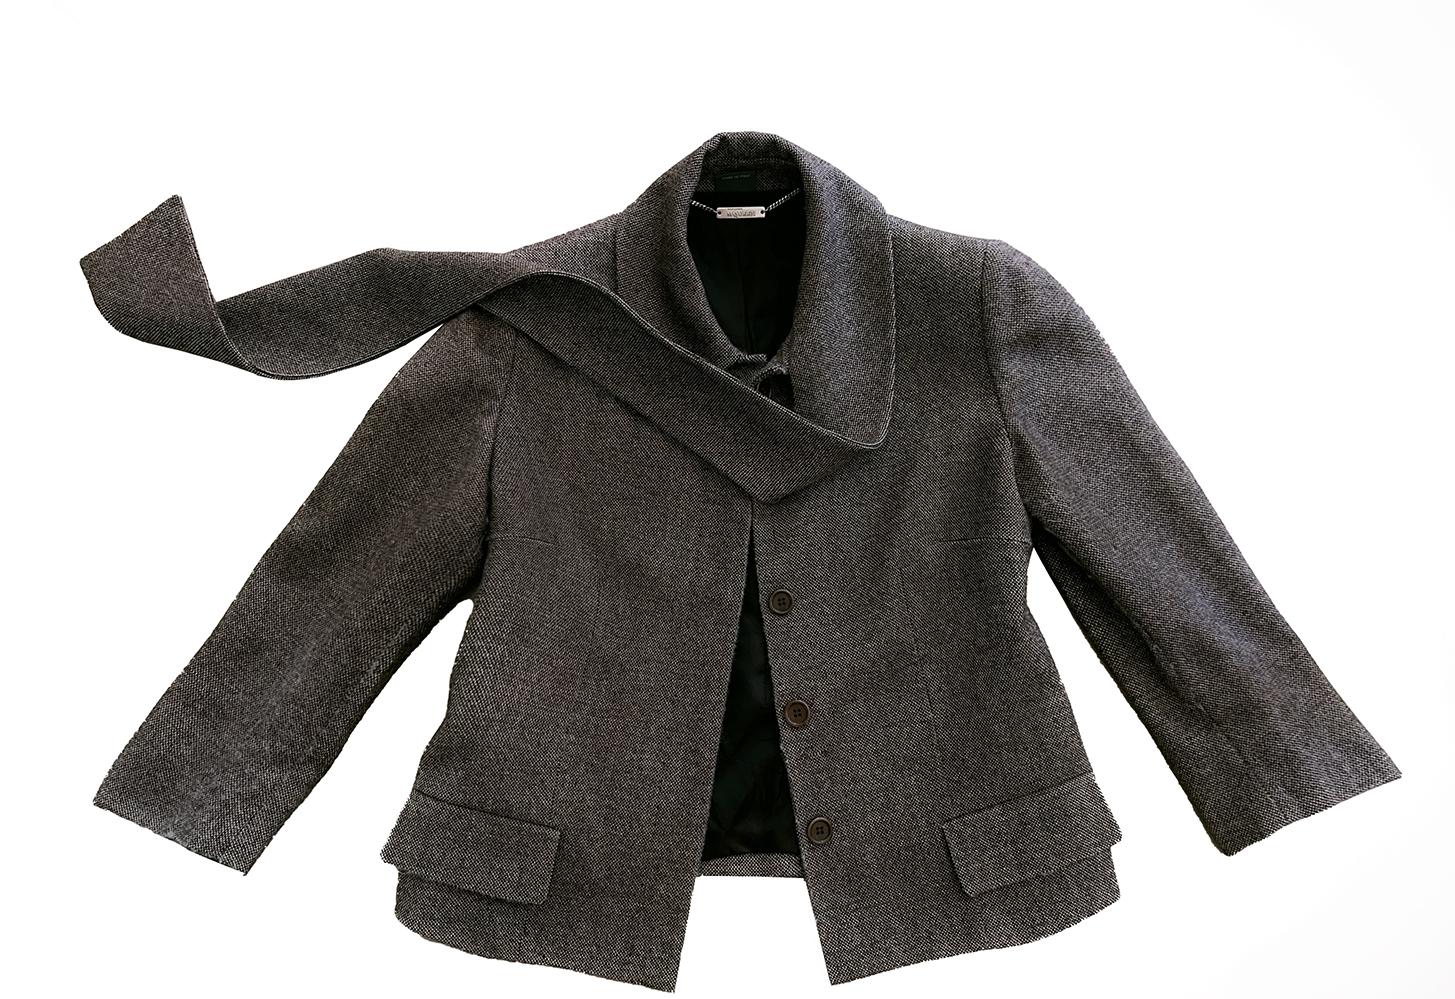 Alexander McQueen Archival FW 2005 'The Man Who Knew Too Much' Wool Skirt Suit For Sale 13